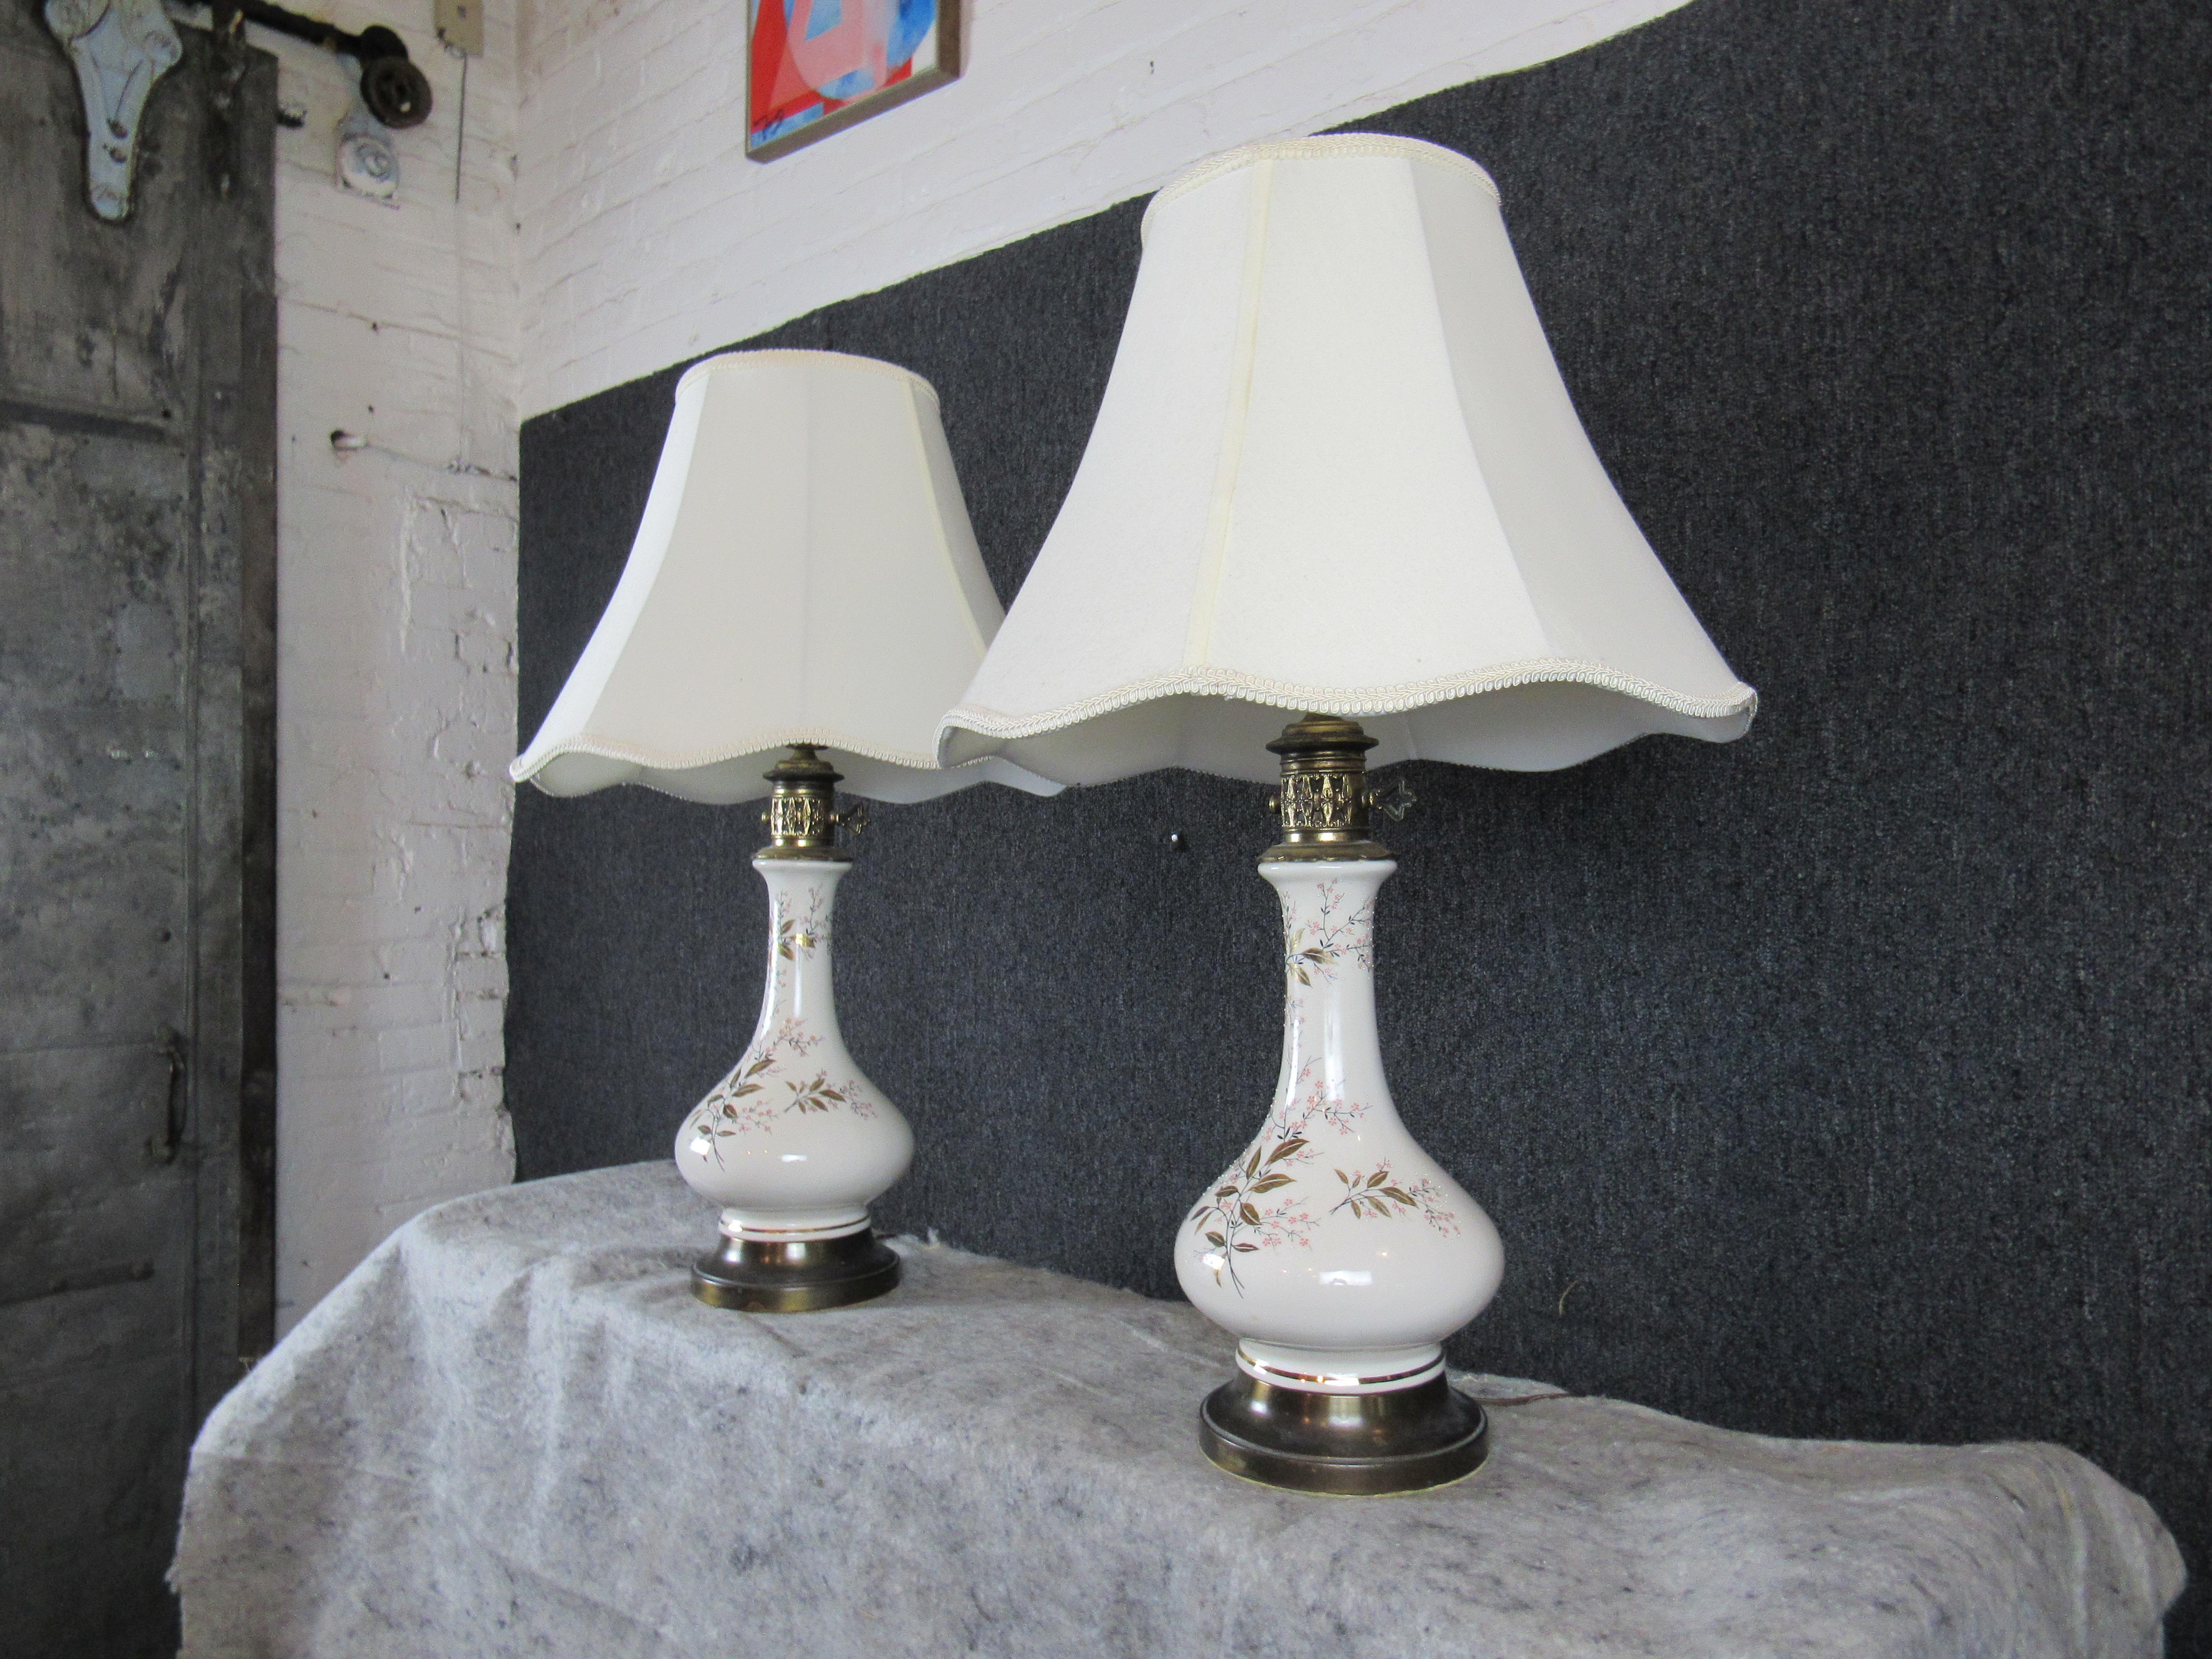 Lovely pair of vintage genie lamps with endless charm! A lovely ceramic vase is adorned with a painted cherry blossom motif, while brass accents add a touch of old-world elegance. Billowy fabric shades gives a wonderfully soft diffusion to any room.